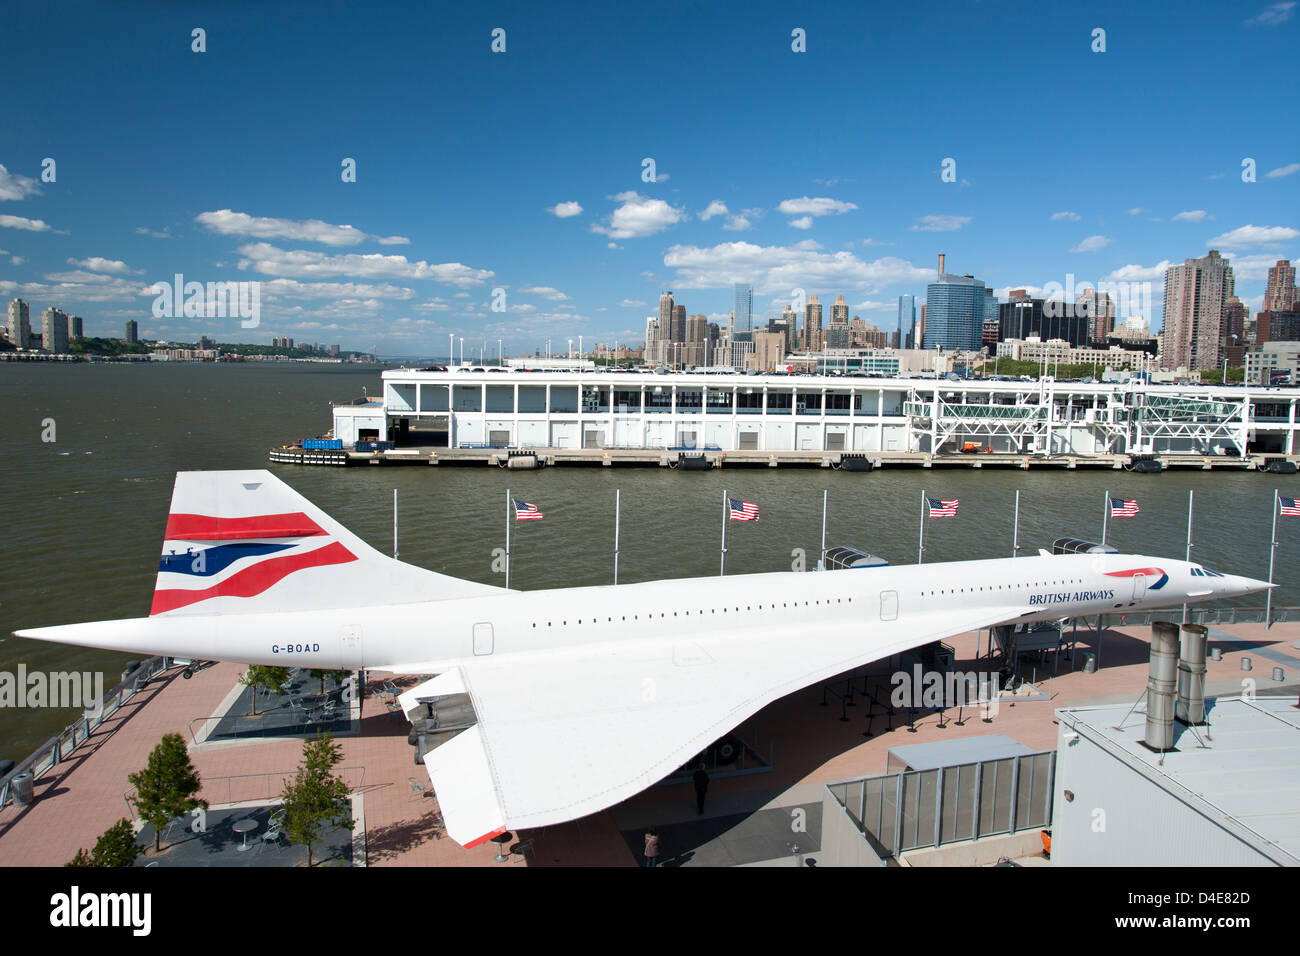 CONCORDE AIRLINER ON FLIGHT DECK OF INTREPID SEA AIR AND SPACE MUSEUM MANHATTAN NEW YORK CITY USA Stock Photo